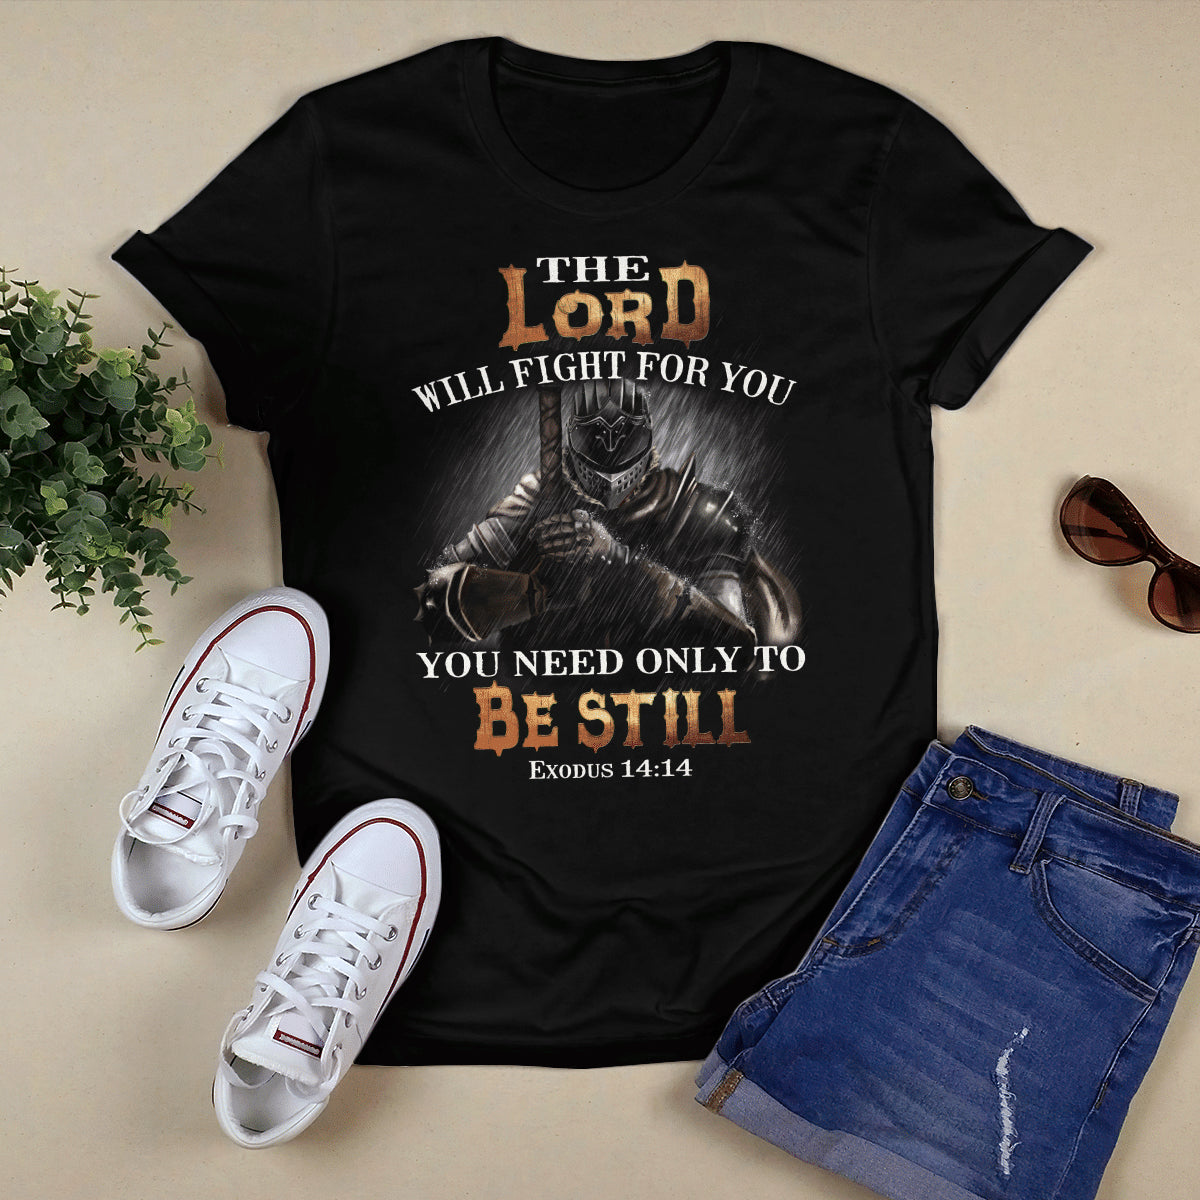 The Lord Will Fight For You, You Need Only To Be Still T-shirt - Exodus 14:14 - Jesus T-Shirt - Christian Shirts For Men & Women - Ciaocustom